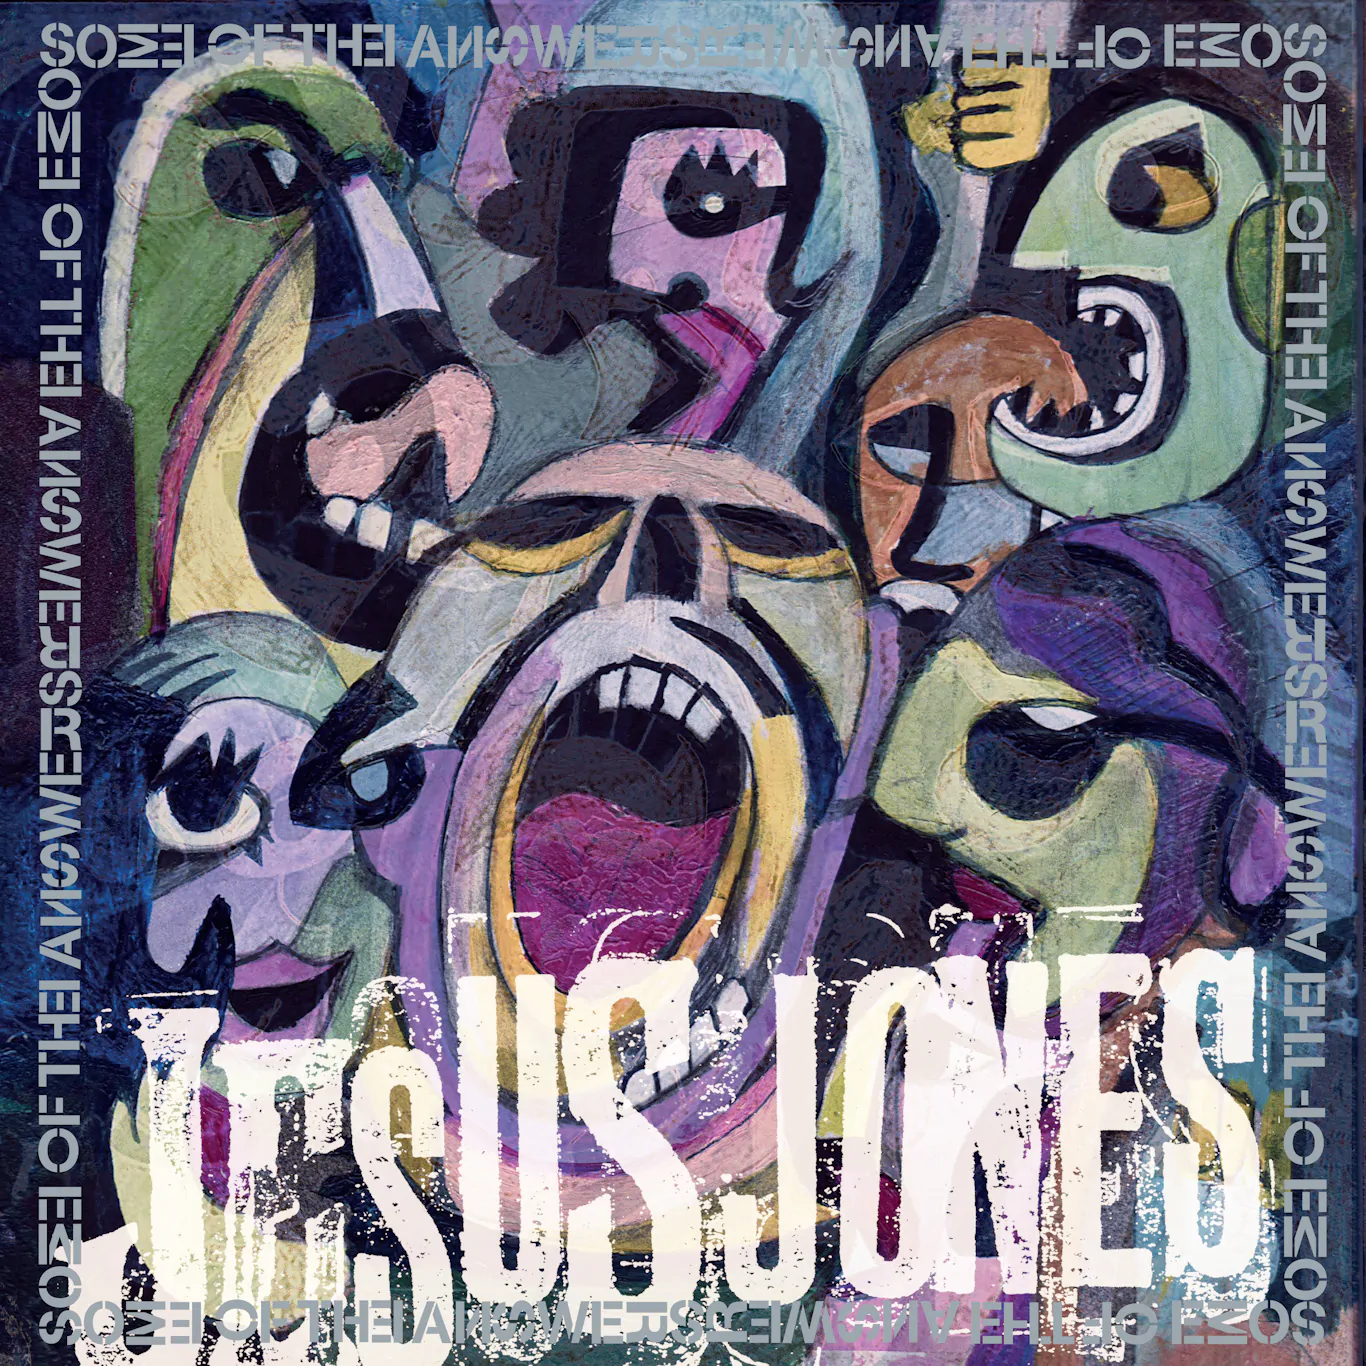 JESUS JONES announce ‘Some Of The Answers’ – a new career-spanning 15 CD box set